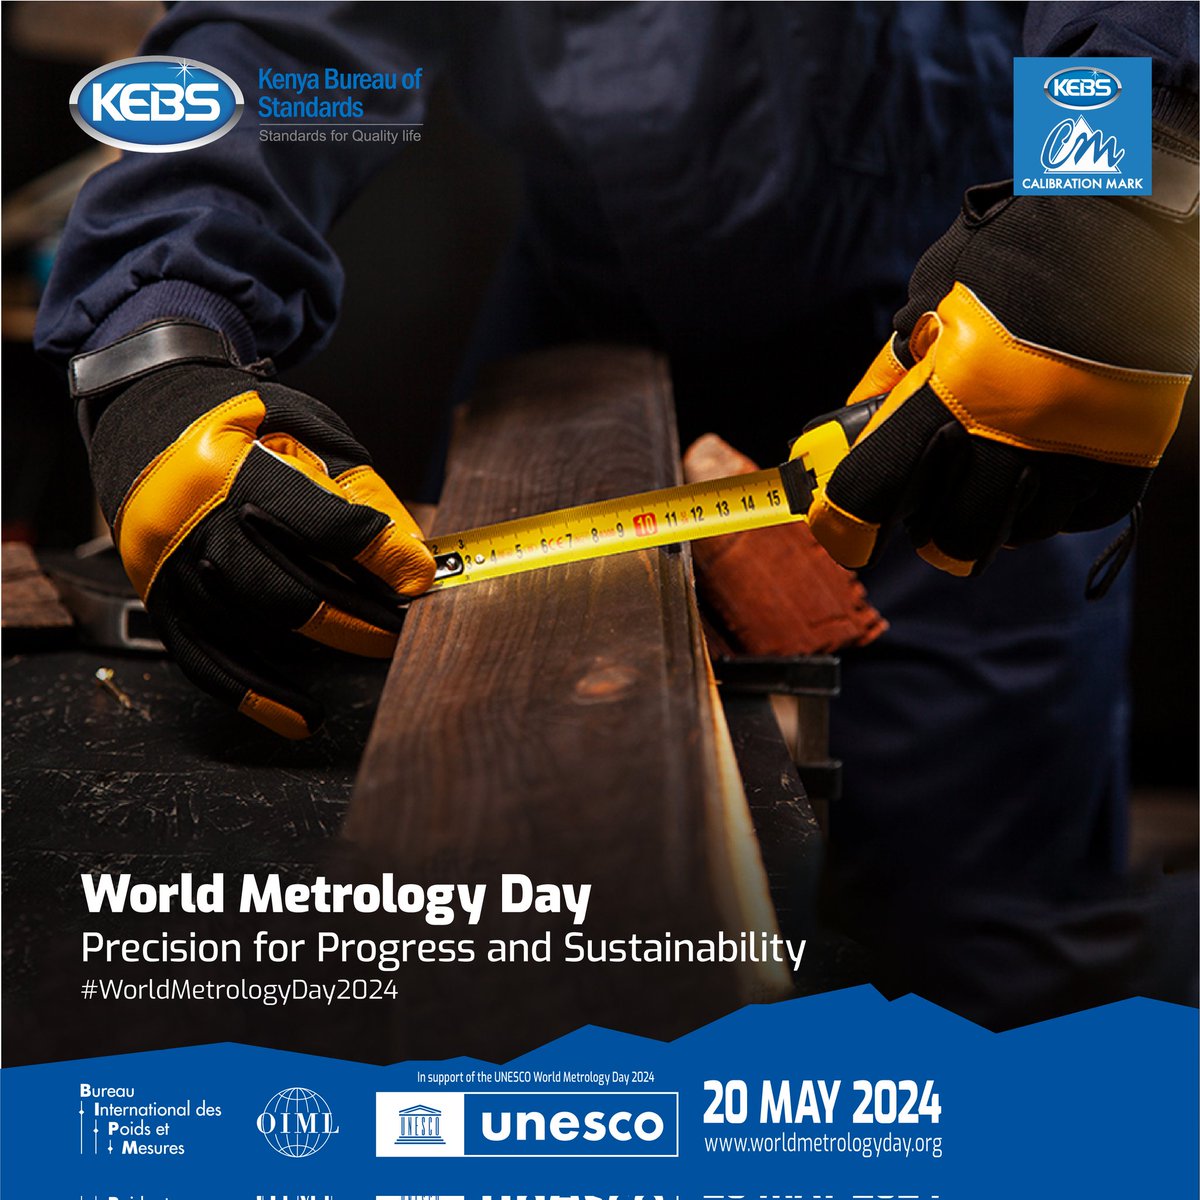 Through accurate measurements, manufacturers not only guarantee product quality but also reduce waste and energy consumption.Celebrate with us #WorldMetrologyDay2024 on 20th May as #Metrology paves the way for a more sustainable future!^HW #PrecisionForProgress